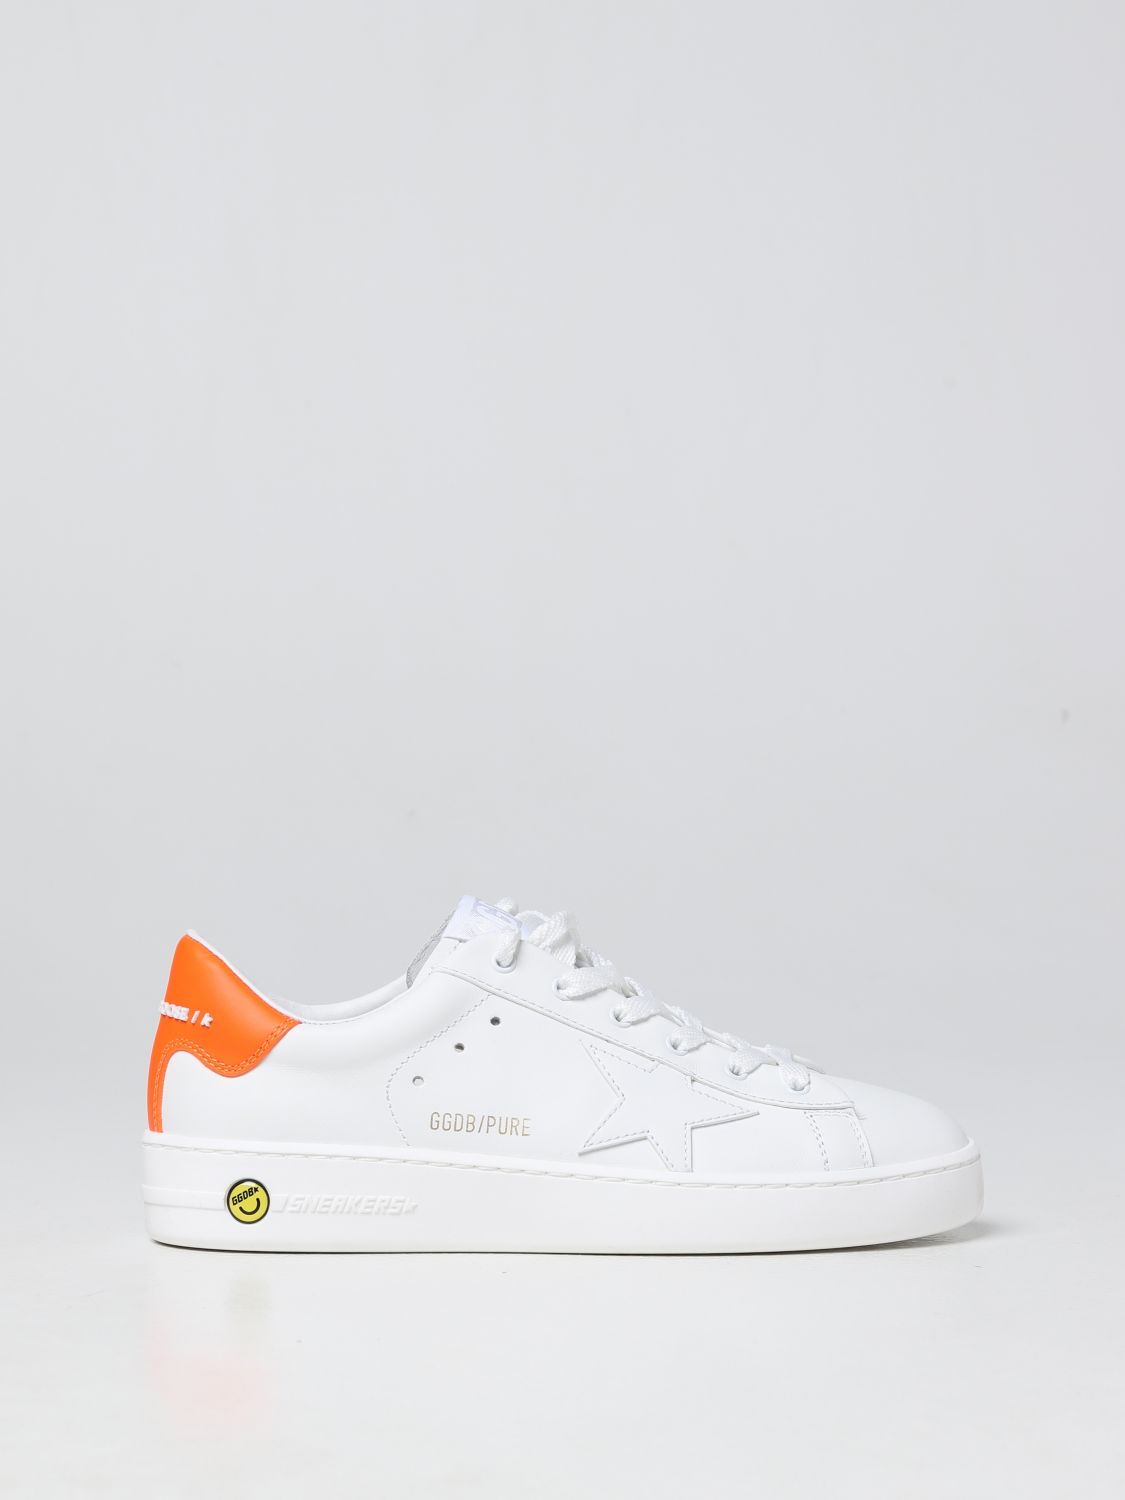 GOLDEN GOOSE PURE NEW GOLDEN GOOSE TRAINERS IN LEATHER,d05135001